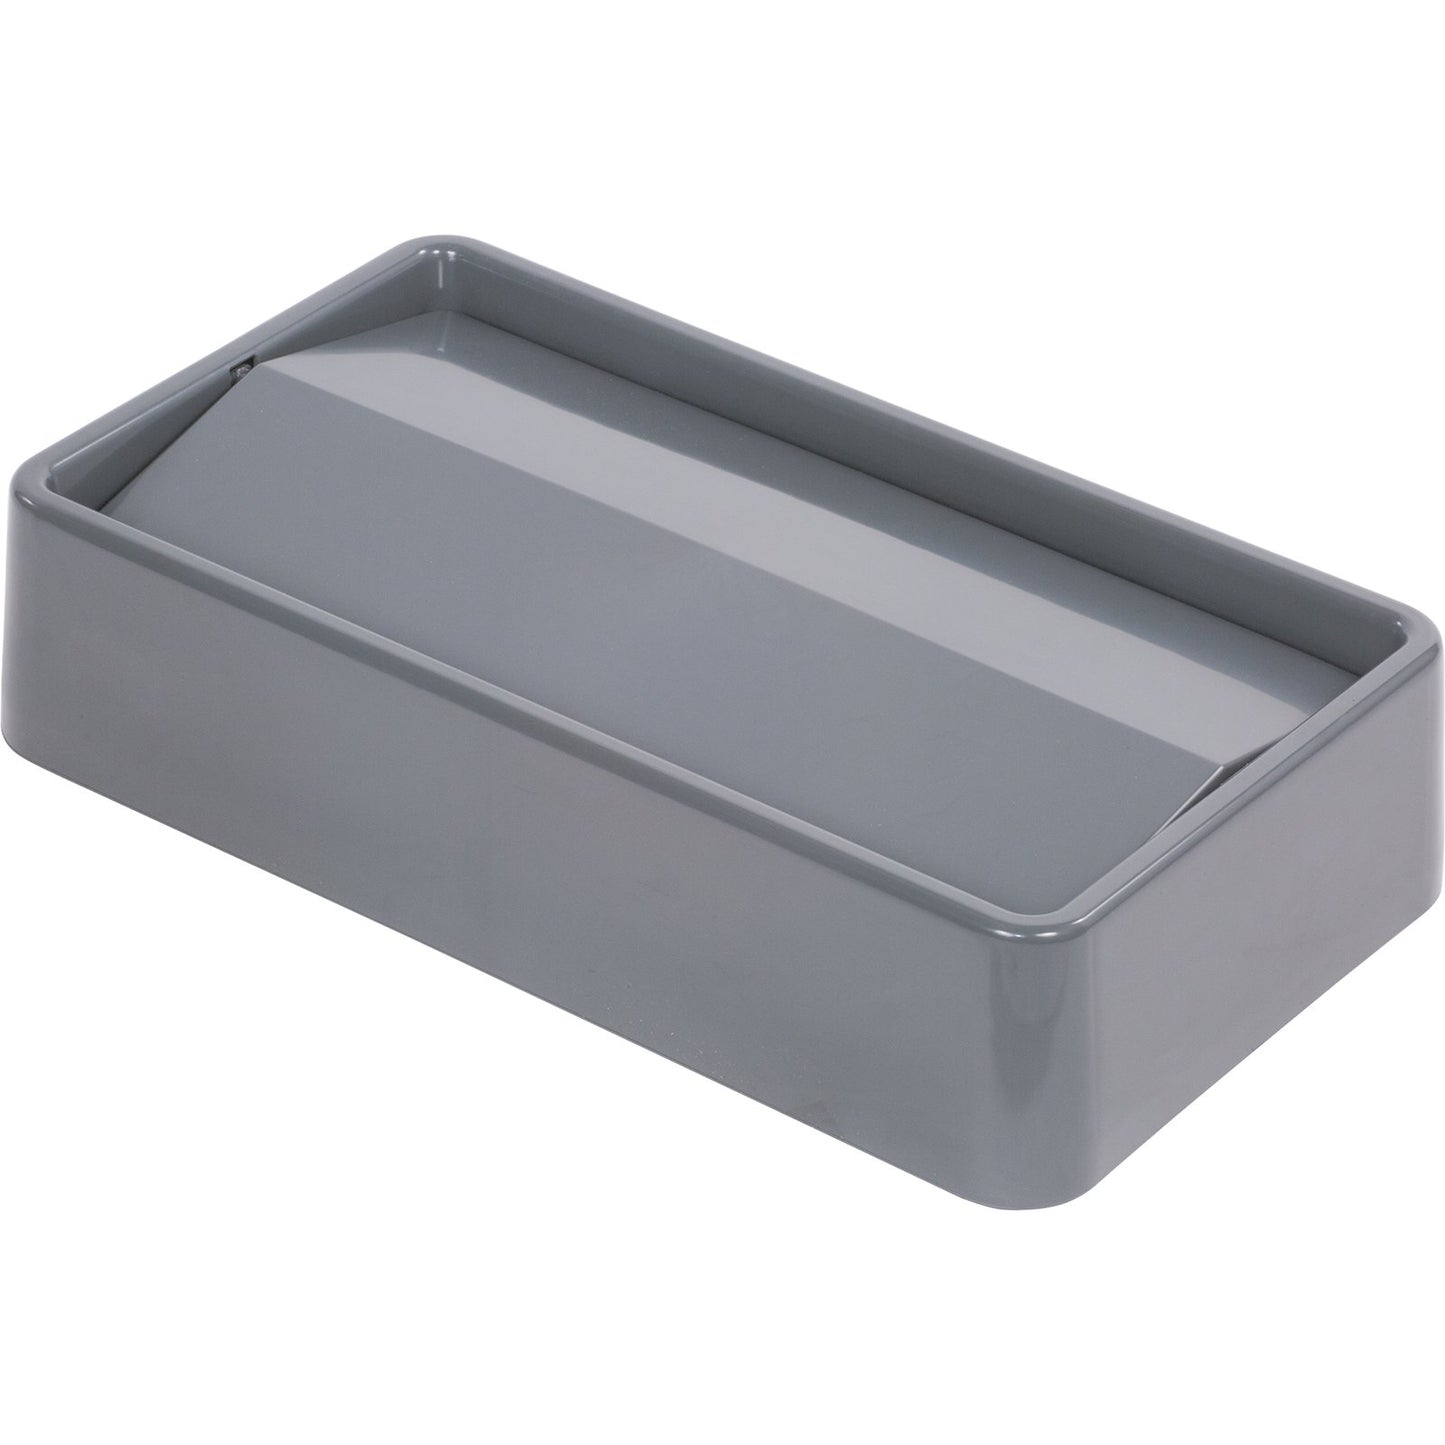 WING TOP LID, RECTANGULAR FOR 15/23 GAL. TRIMLINE